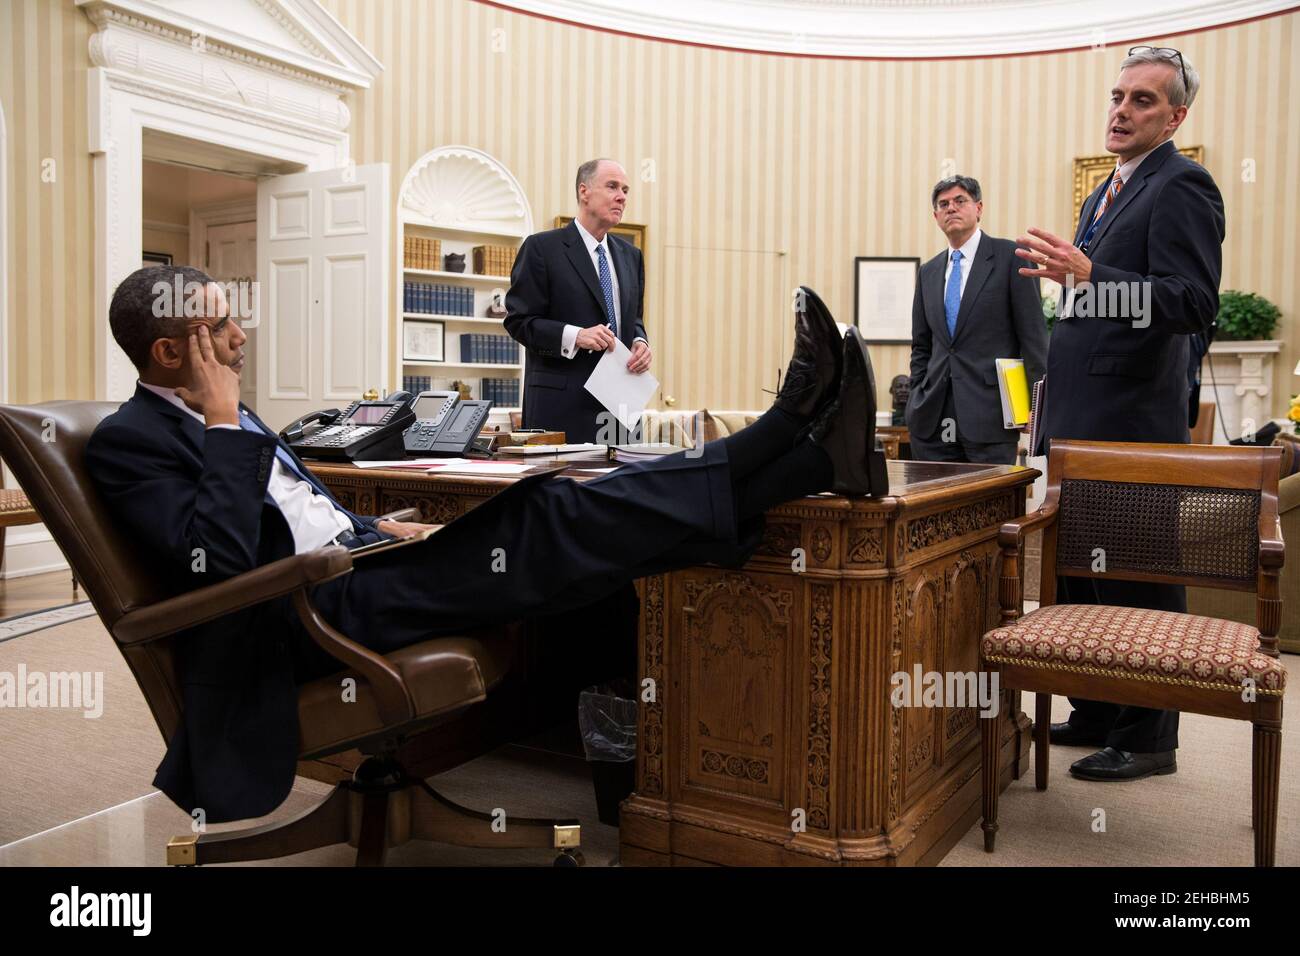 President Barack Obama meets with National Security Advisor Tom Donilon, Chief of Staff Jack Lew, and Deputy National Security Advisor Denis McDonough in the Oval Office, Nov. 14, 2012. Stock Photo